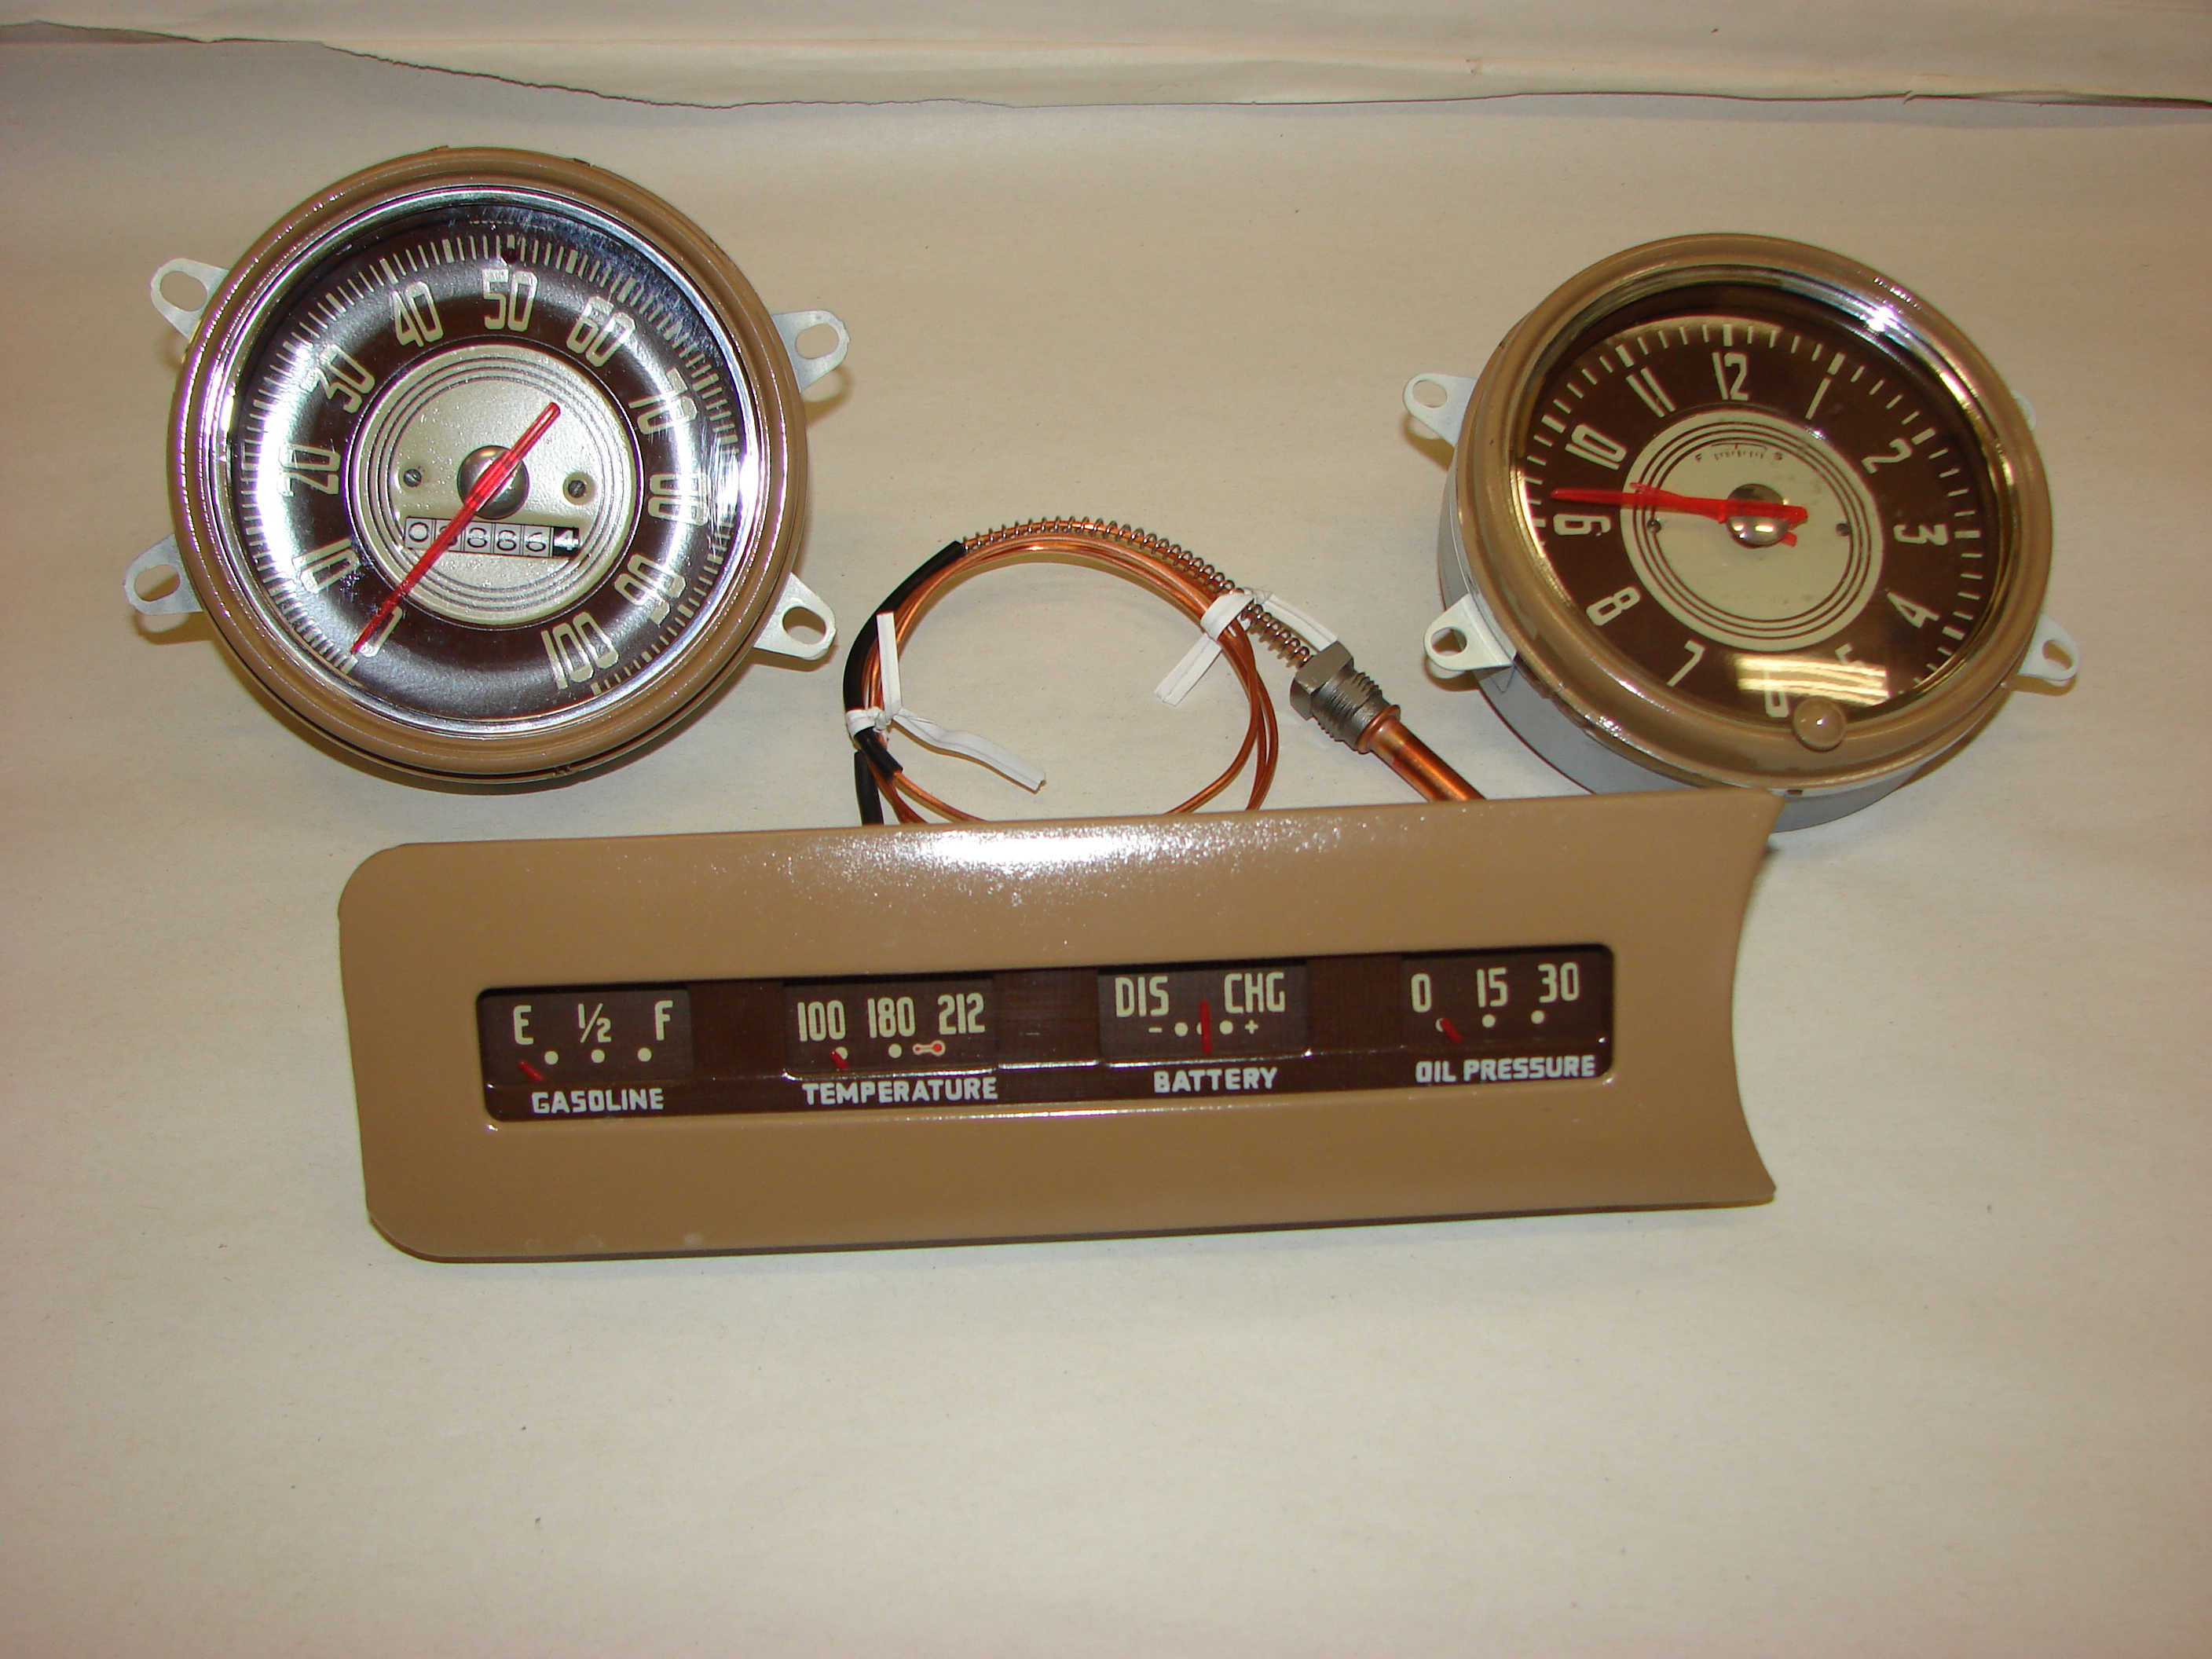 Repaired speedometers and car parts